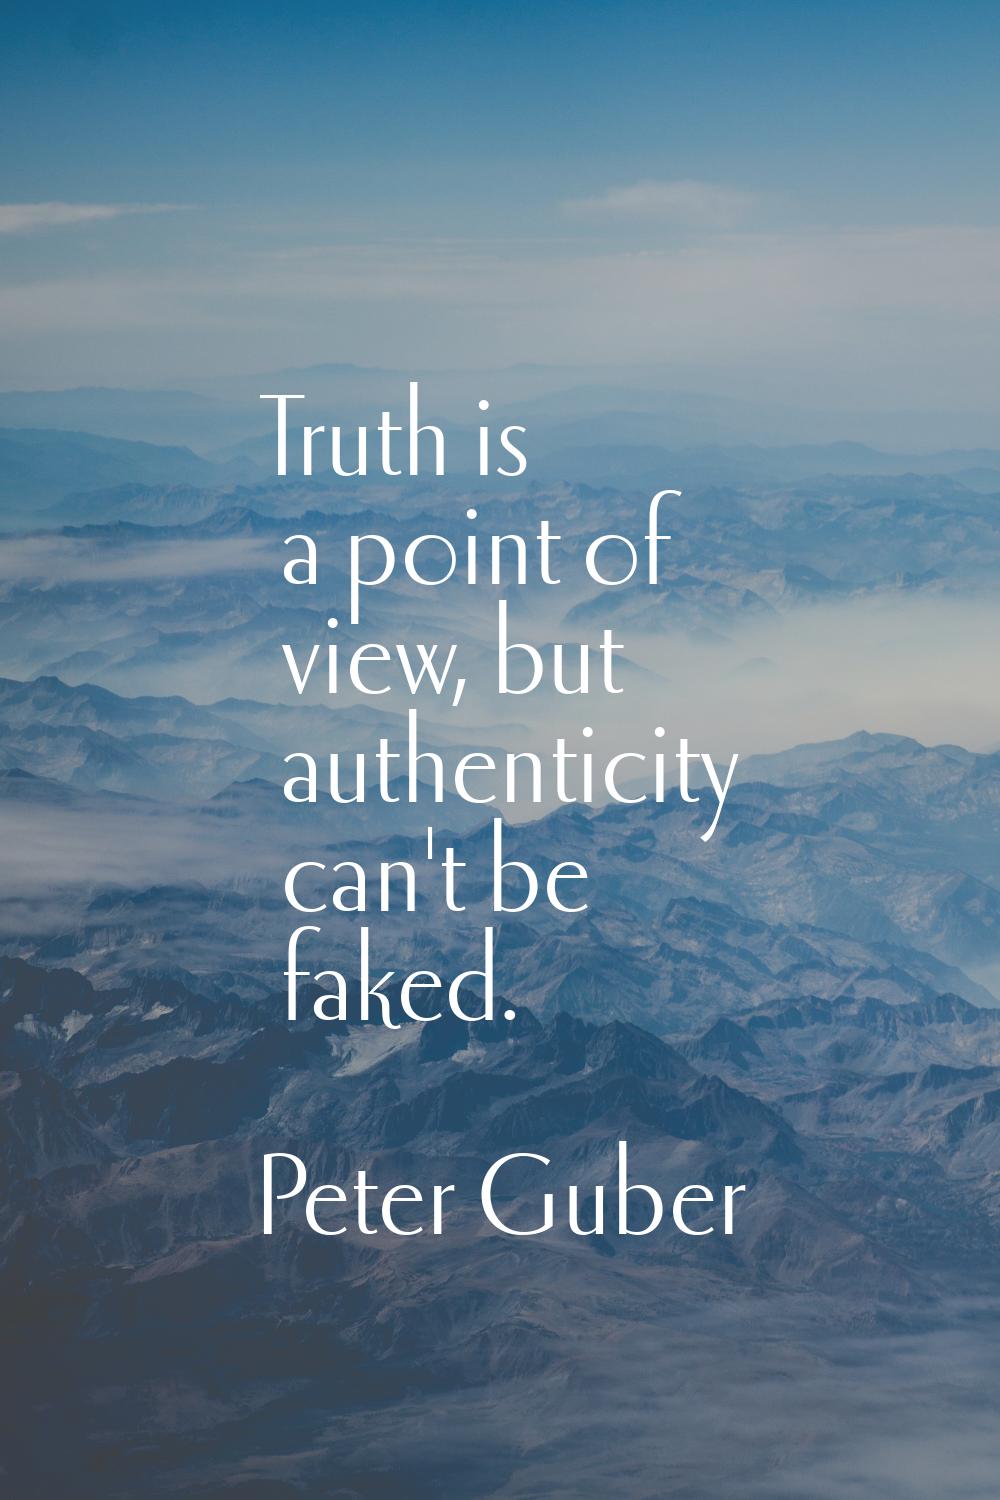 Truth is a point of view, but authenticity can't be faked.